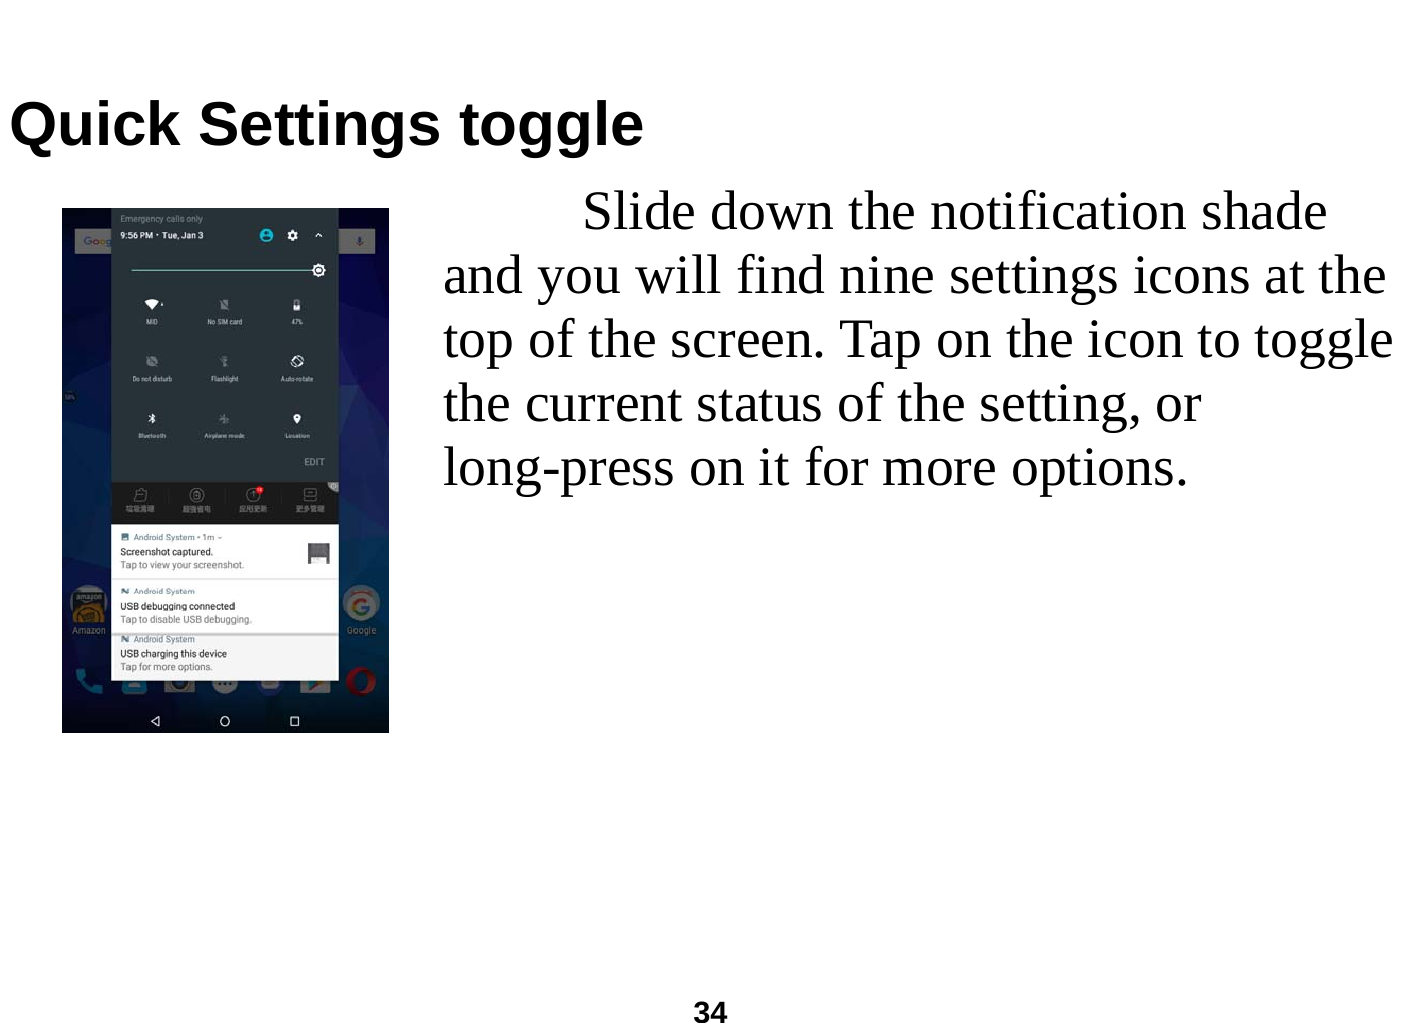  34  Quick Settings toggle      Slide down the notification shade and you will find nine settings icons at the top of the screen. Tap on the icon to toggle the current status of the setting, or long-press on it for more options.    